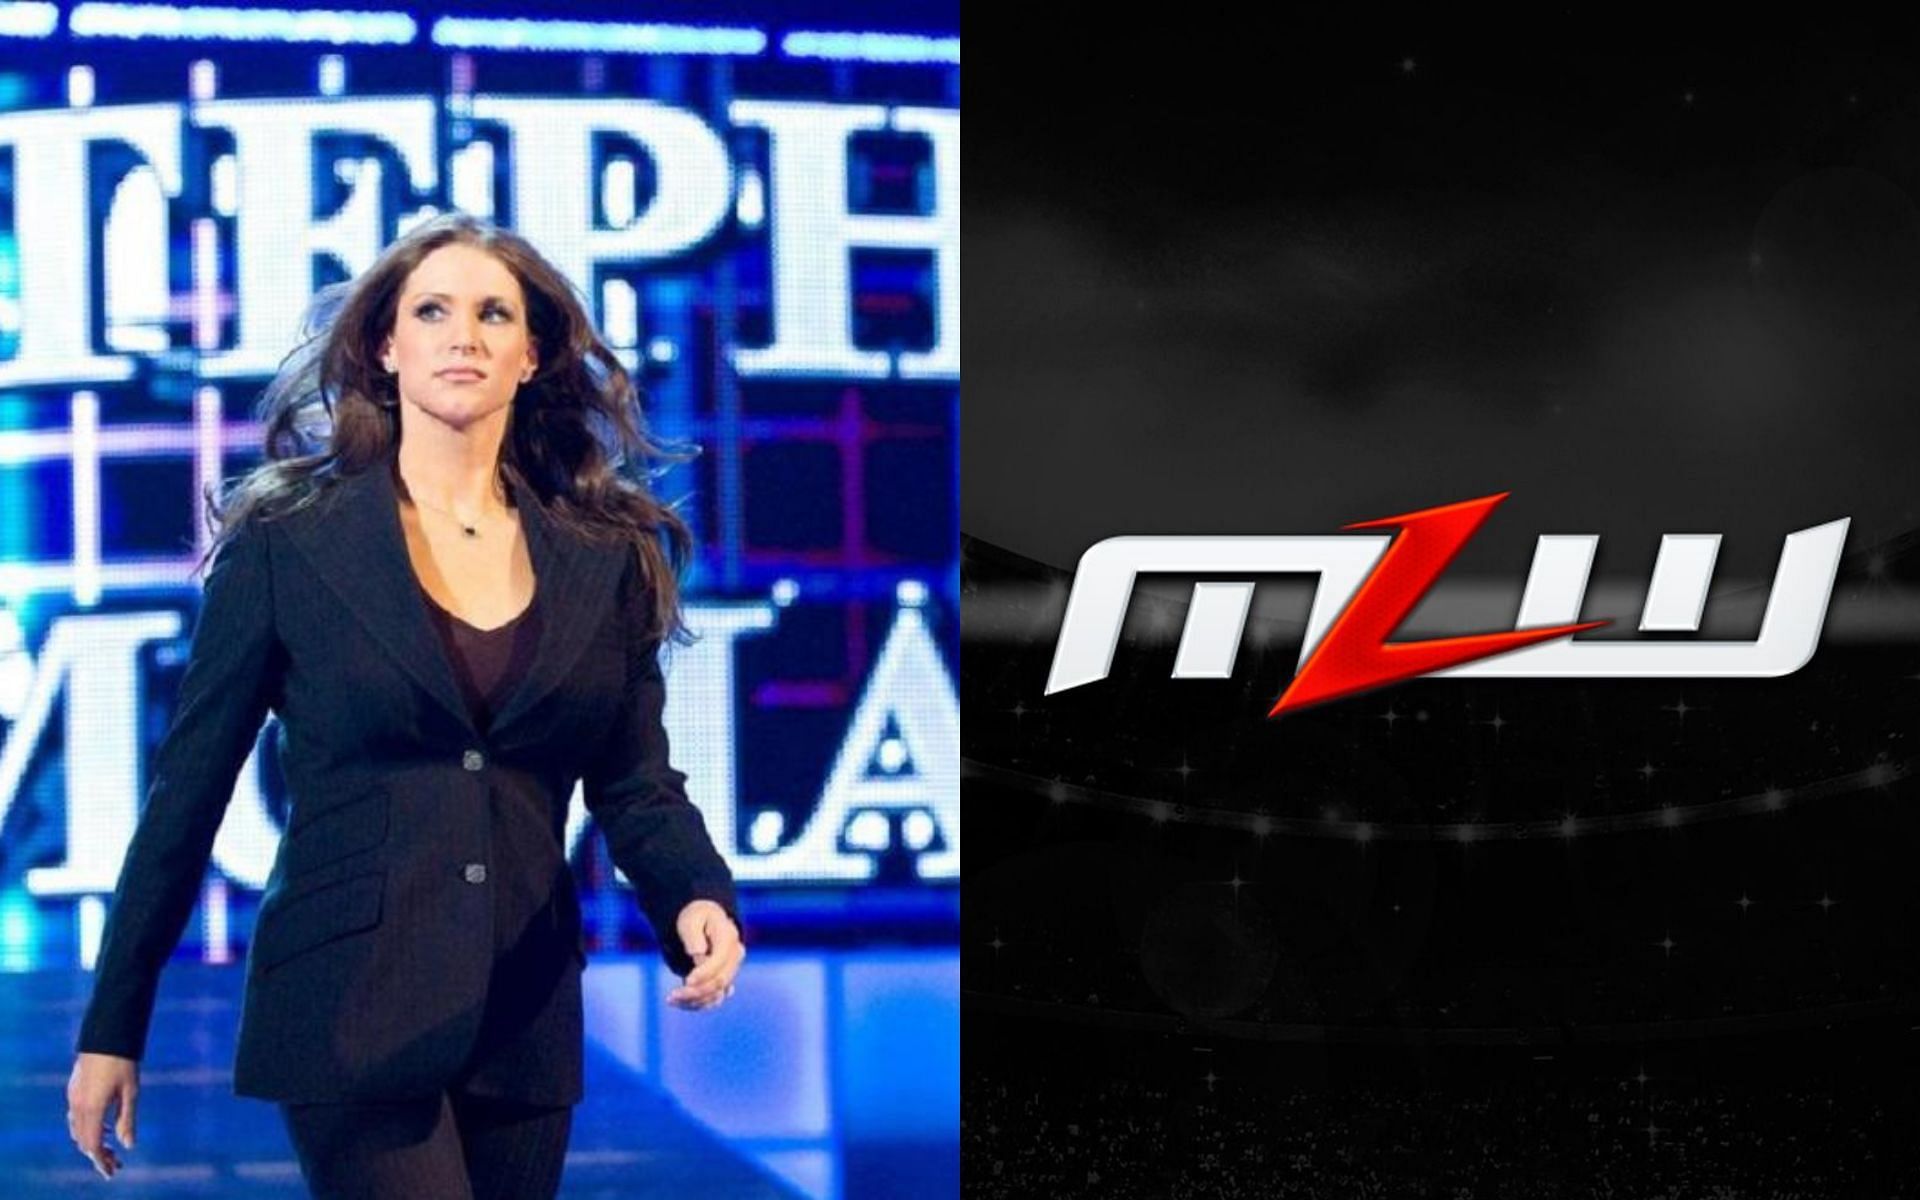 Stephanie McMahon has been the Chief Brand Officer for WWE since 2013